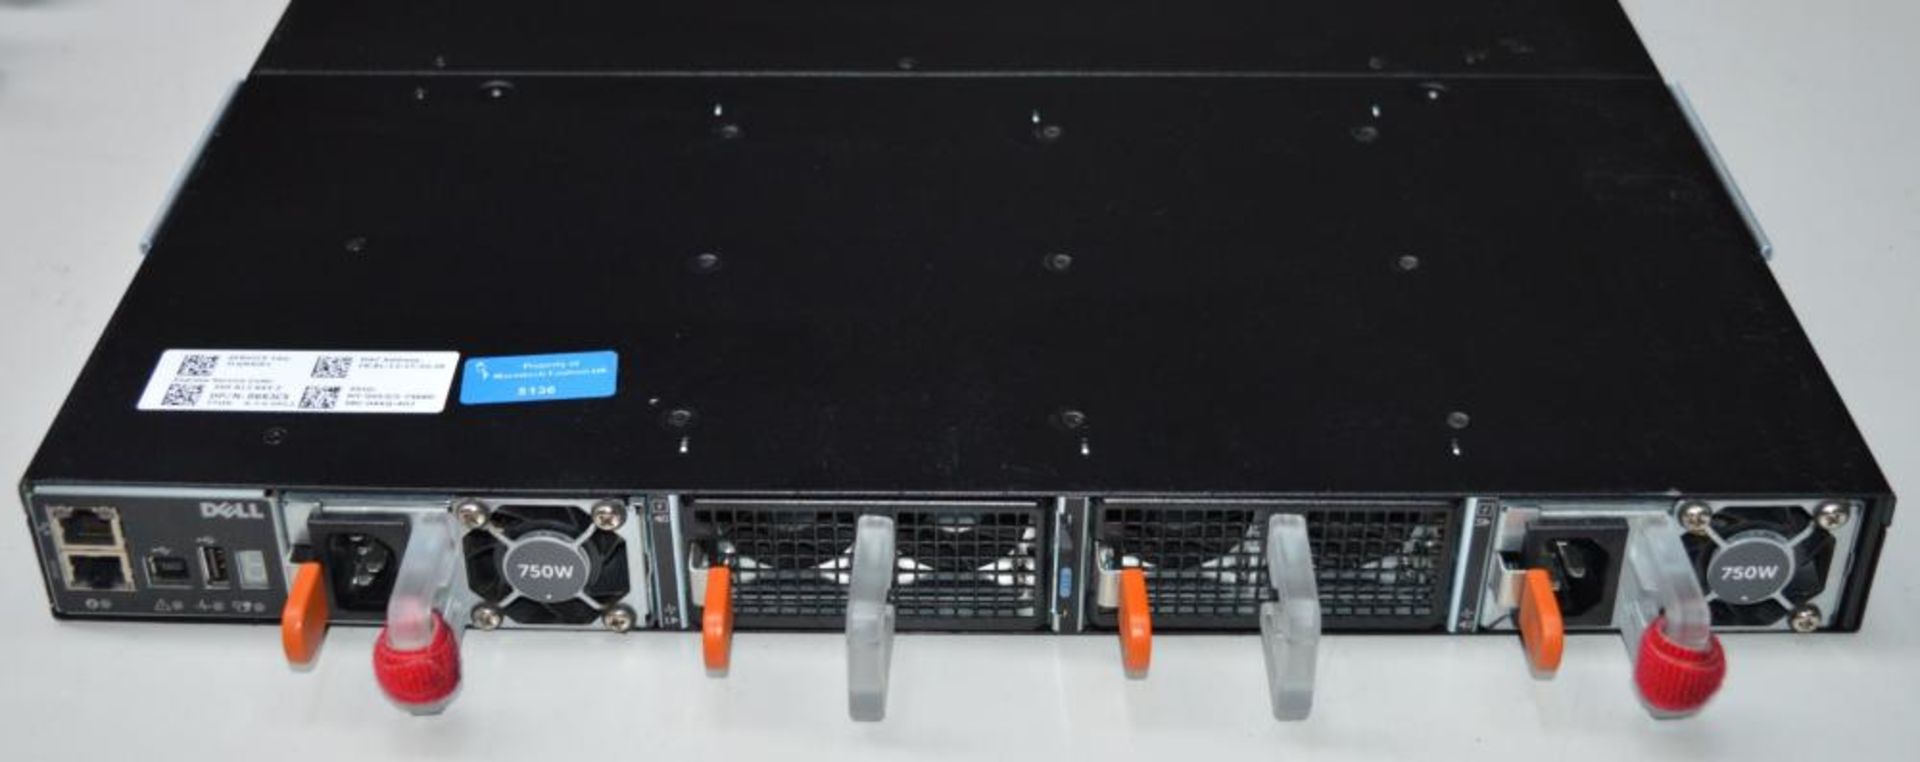 1 x Dell S5000 Modular 1U Storage Switch With 4 x 12xETH10-T Modules & 2 x 750w Power Supplies - Image 8 of 8